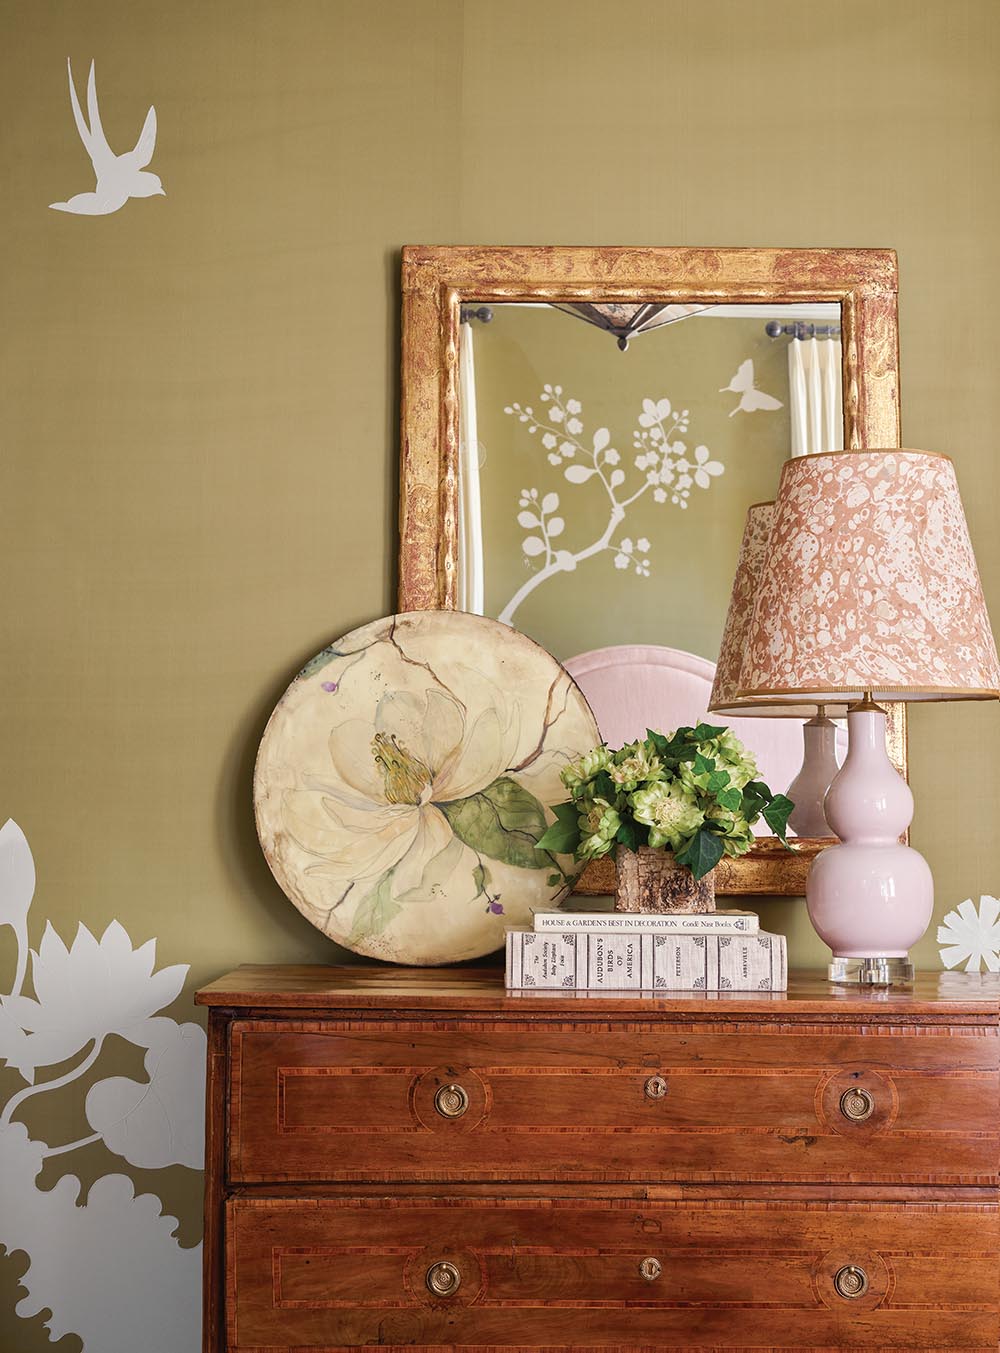 Dresser in girl's bedroom at the FLOWER Atlanta showhouse, pink lamp, round painting of magnolia blossom.